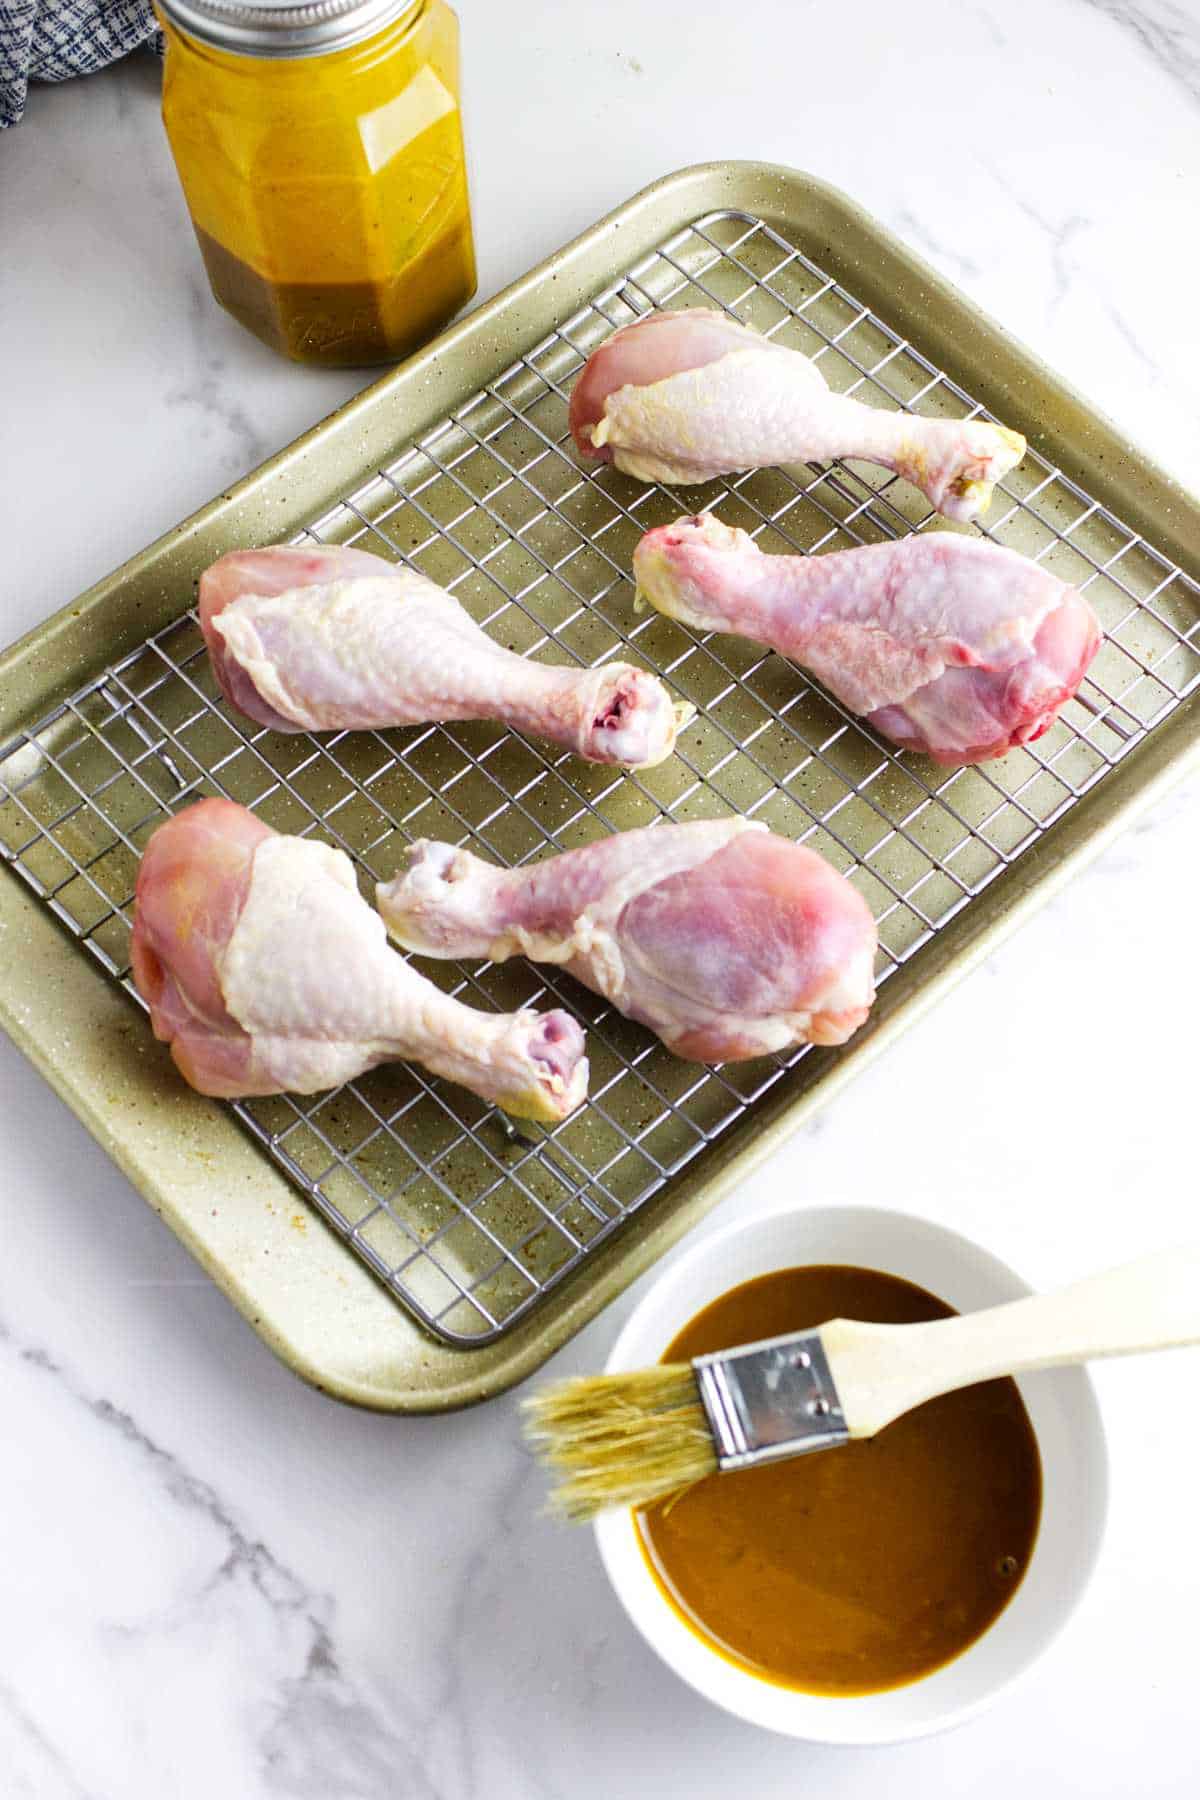 chicken legs on a tray with Honey Gold barbecue sauce nearby.